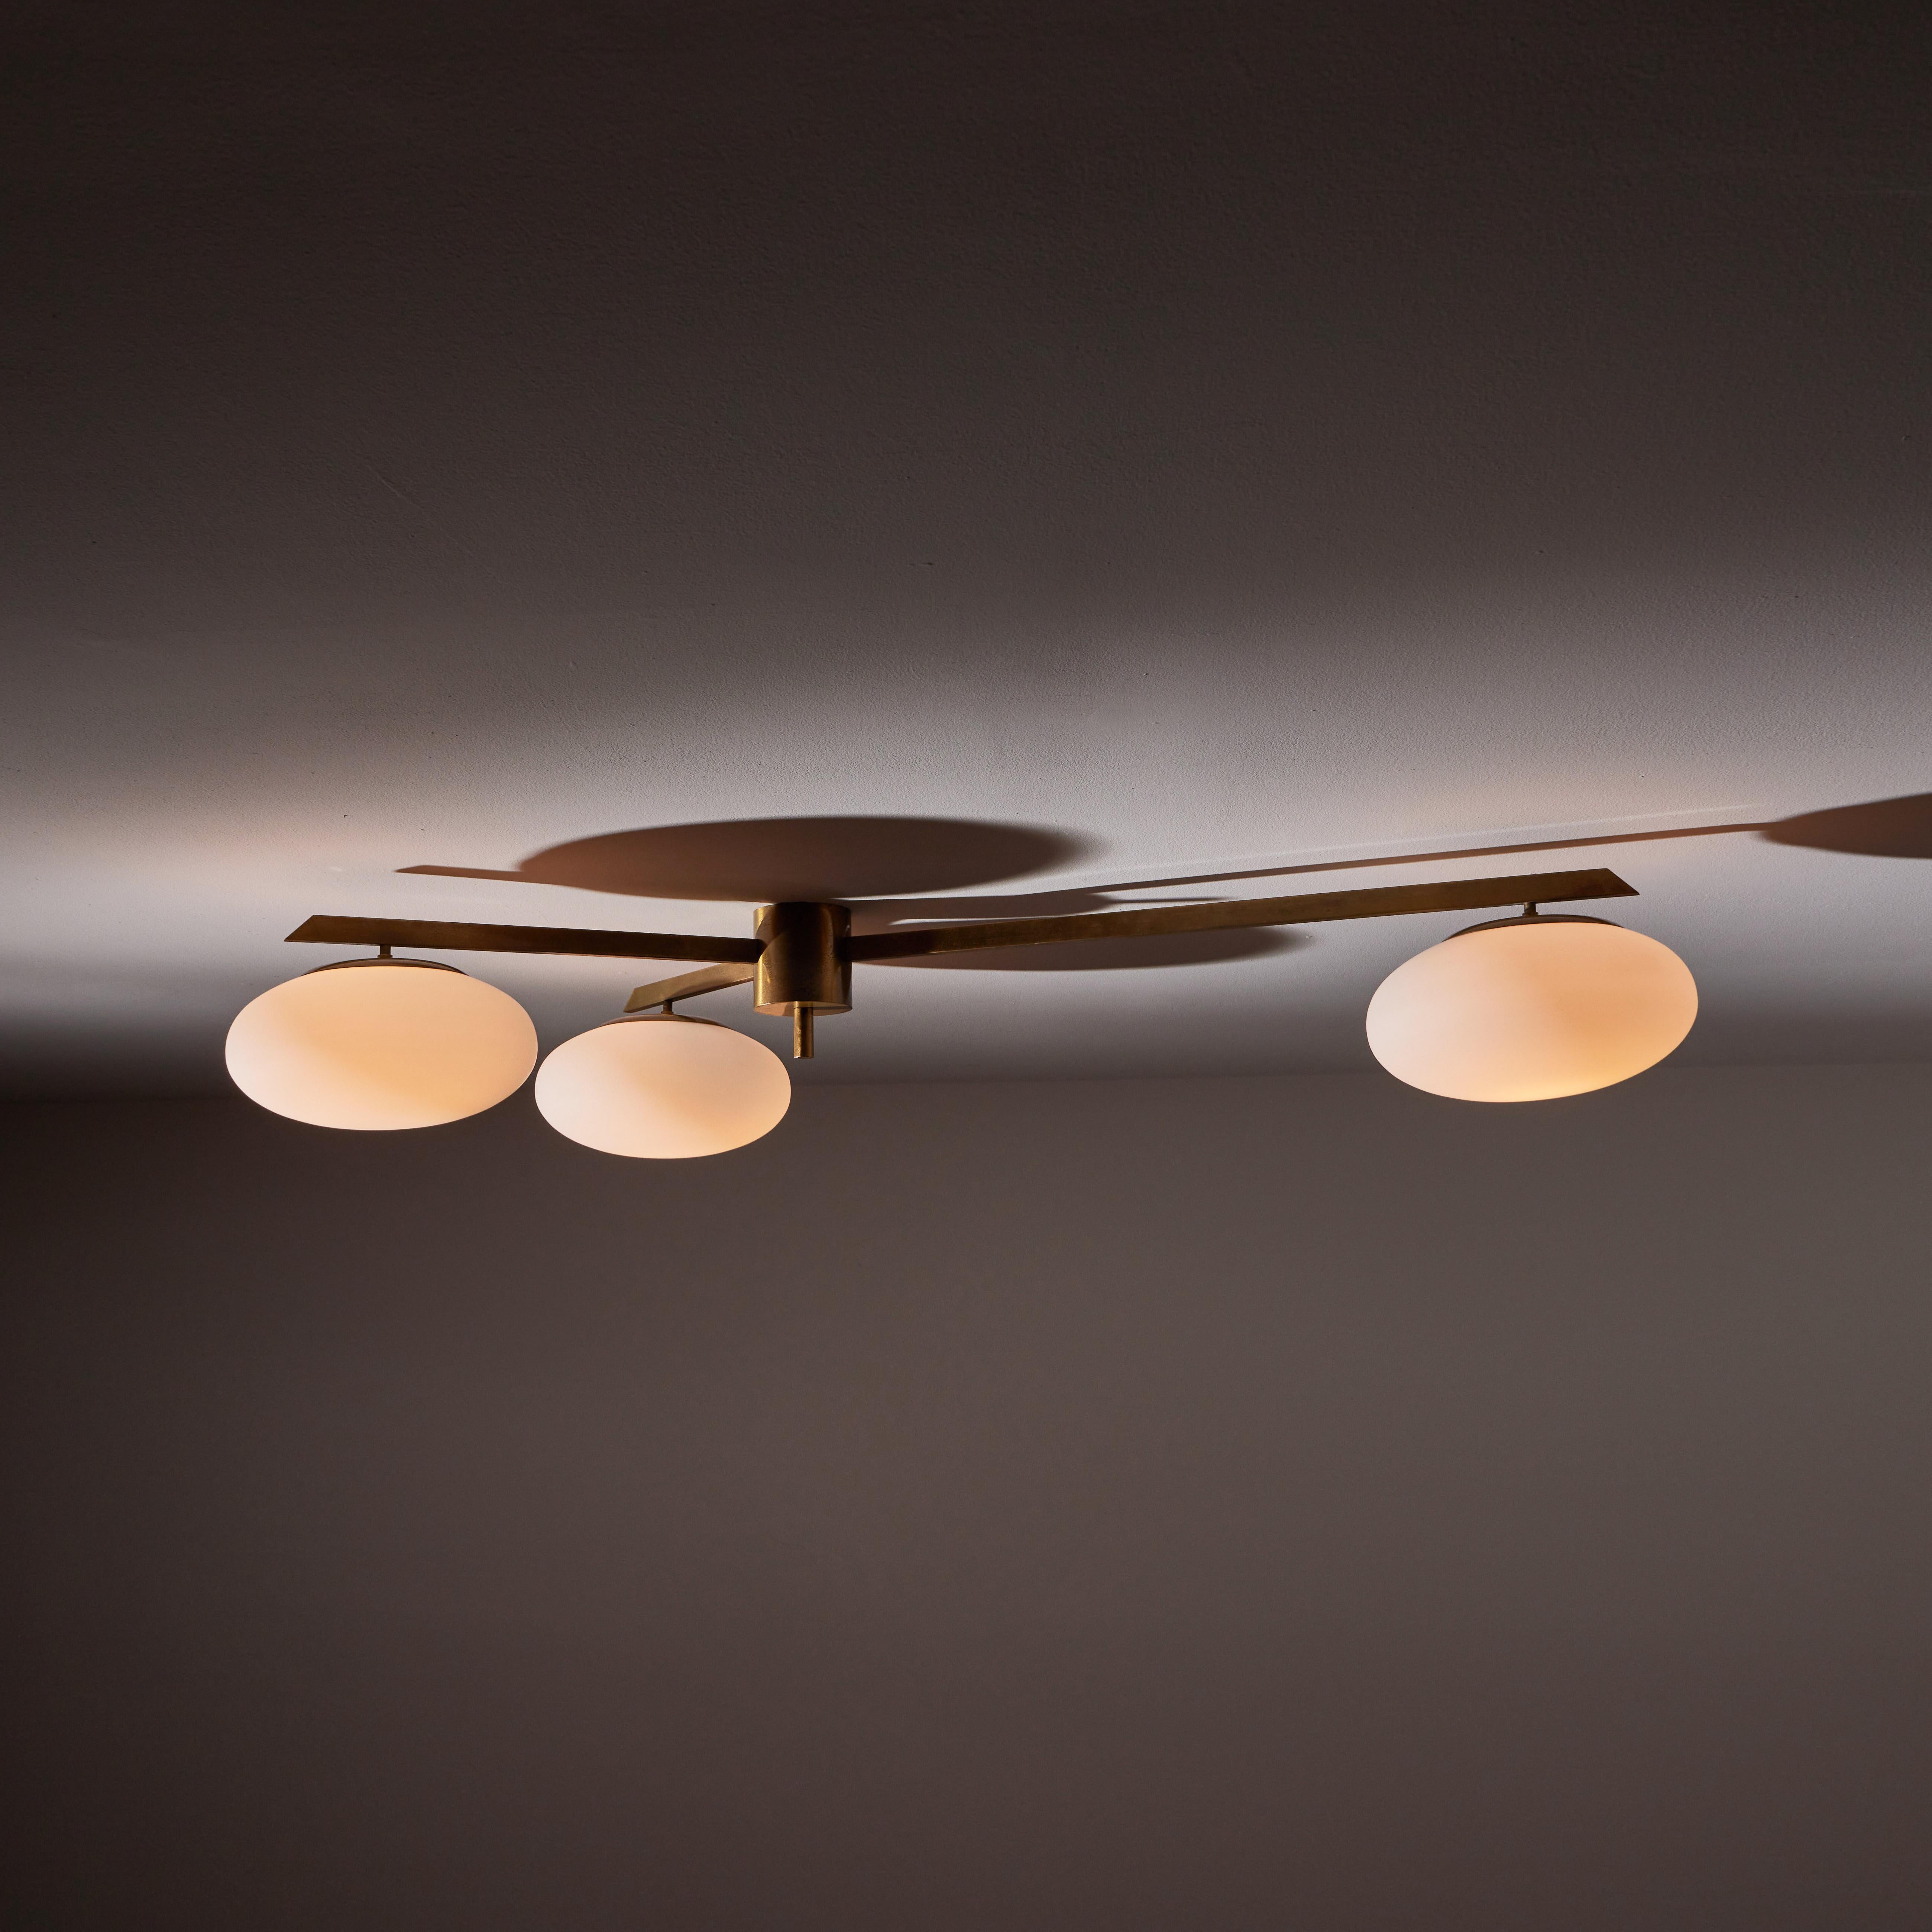 Flush mount ceiling light by Arredoluce. Manufactured in Italy, circa 1950s. Brass, brushed satin glass diffusers. Rewired for U.S. standards. Original canopy. We recommend three E27 40w maximum bulbs. Bulbs provided as a one time courtesy.